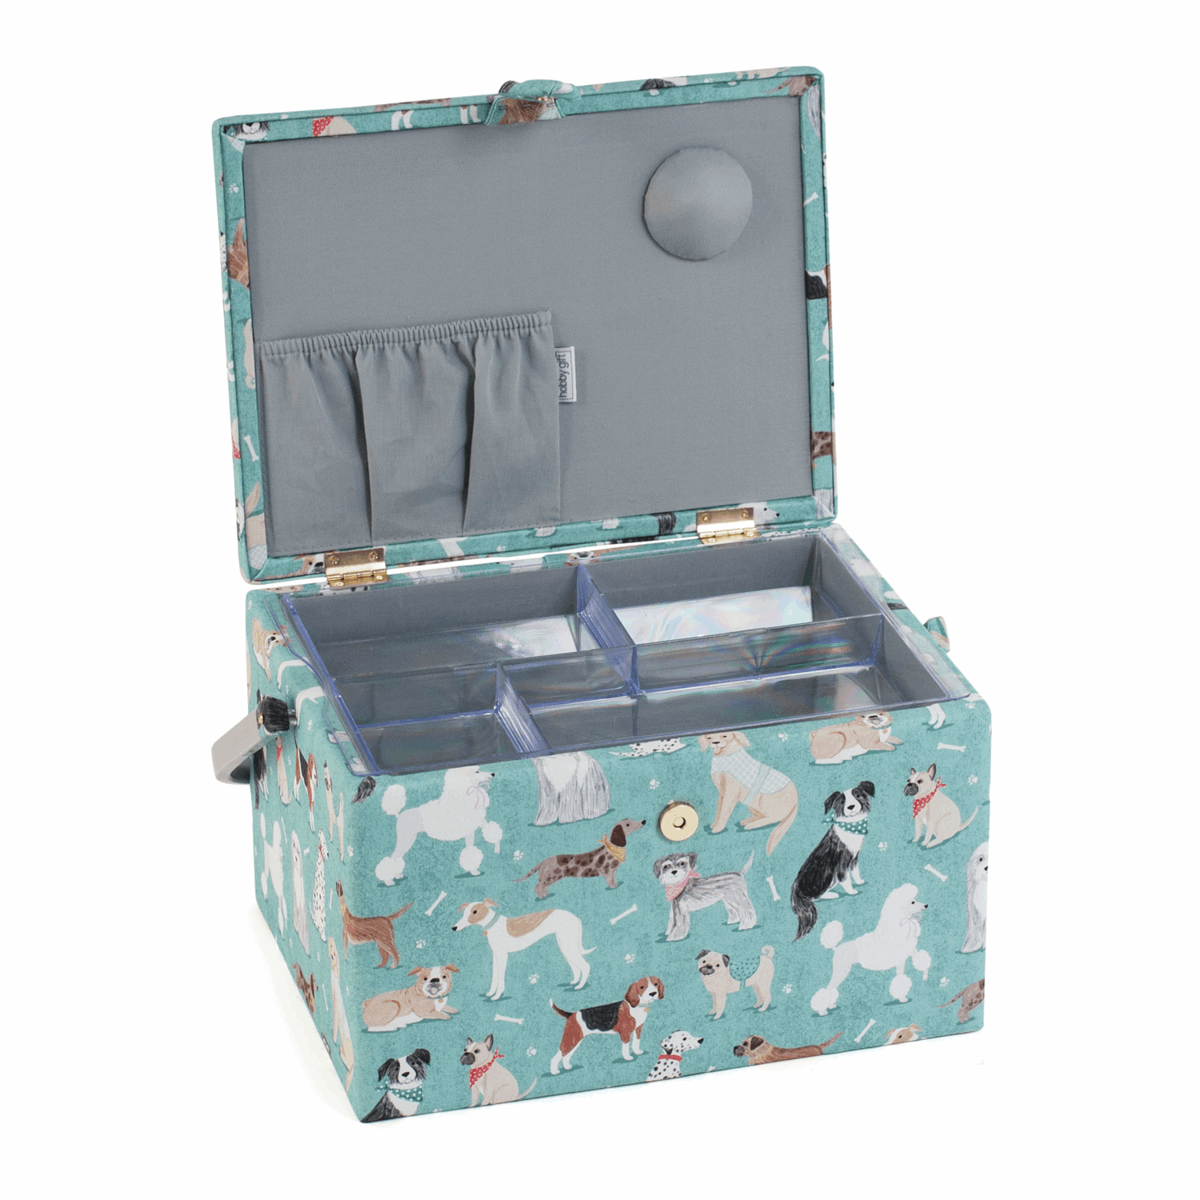 Dogs Sewing Box - Large